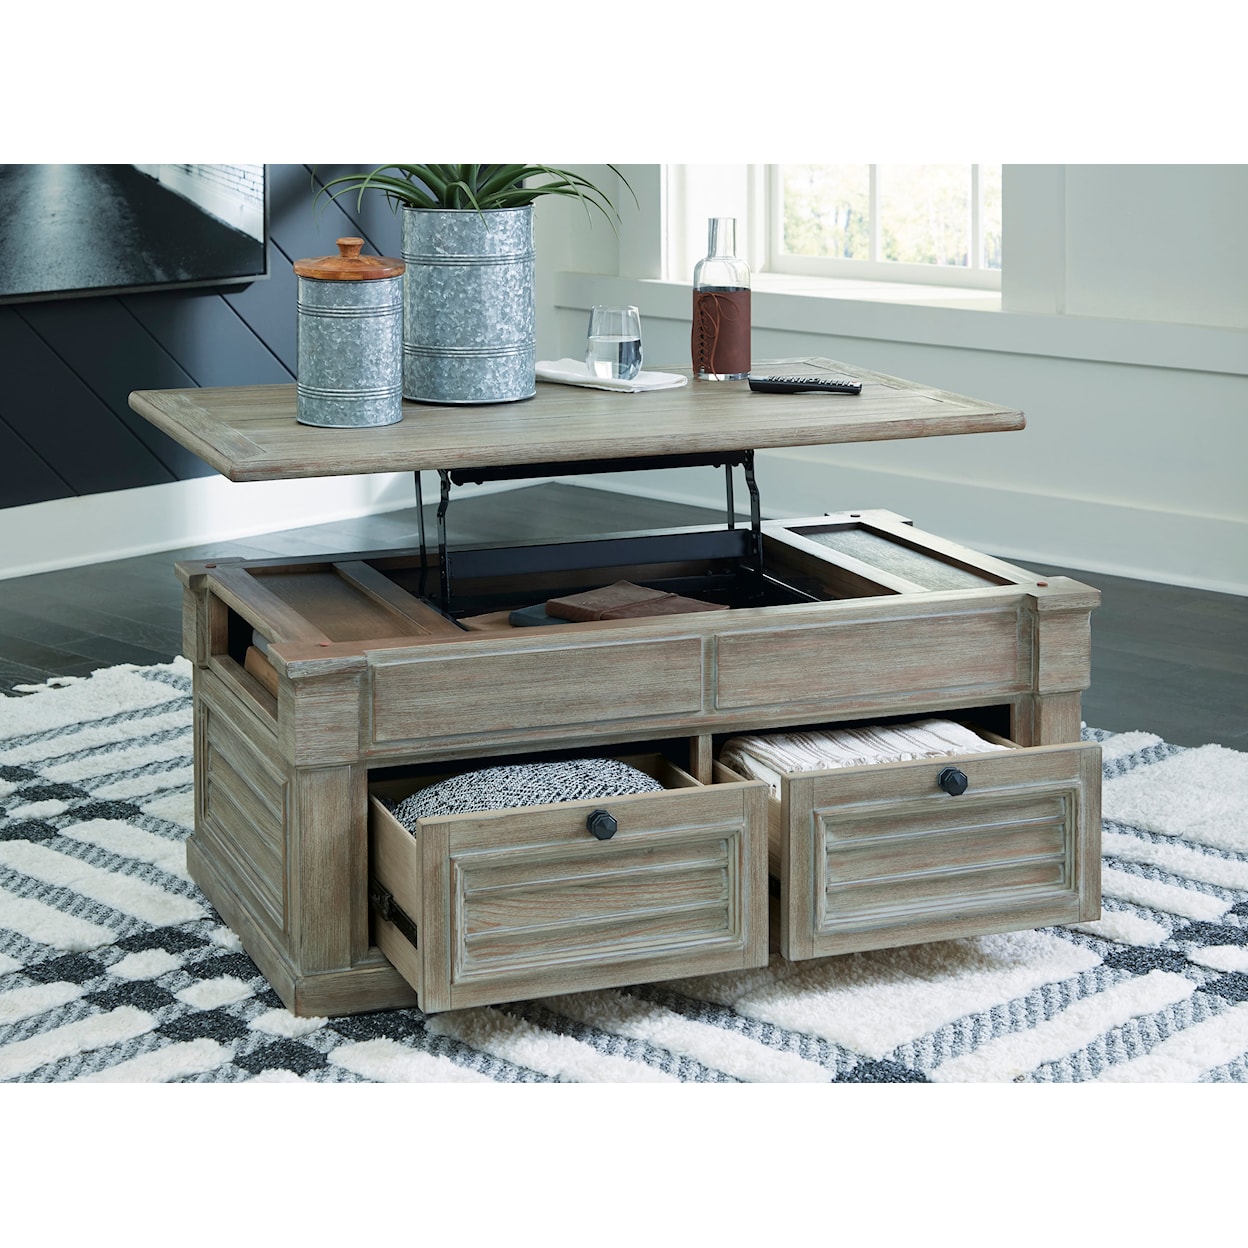 Signature Design by Ashley Moreshire Lift Top Coffee Table